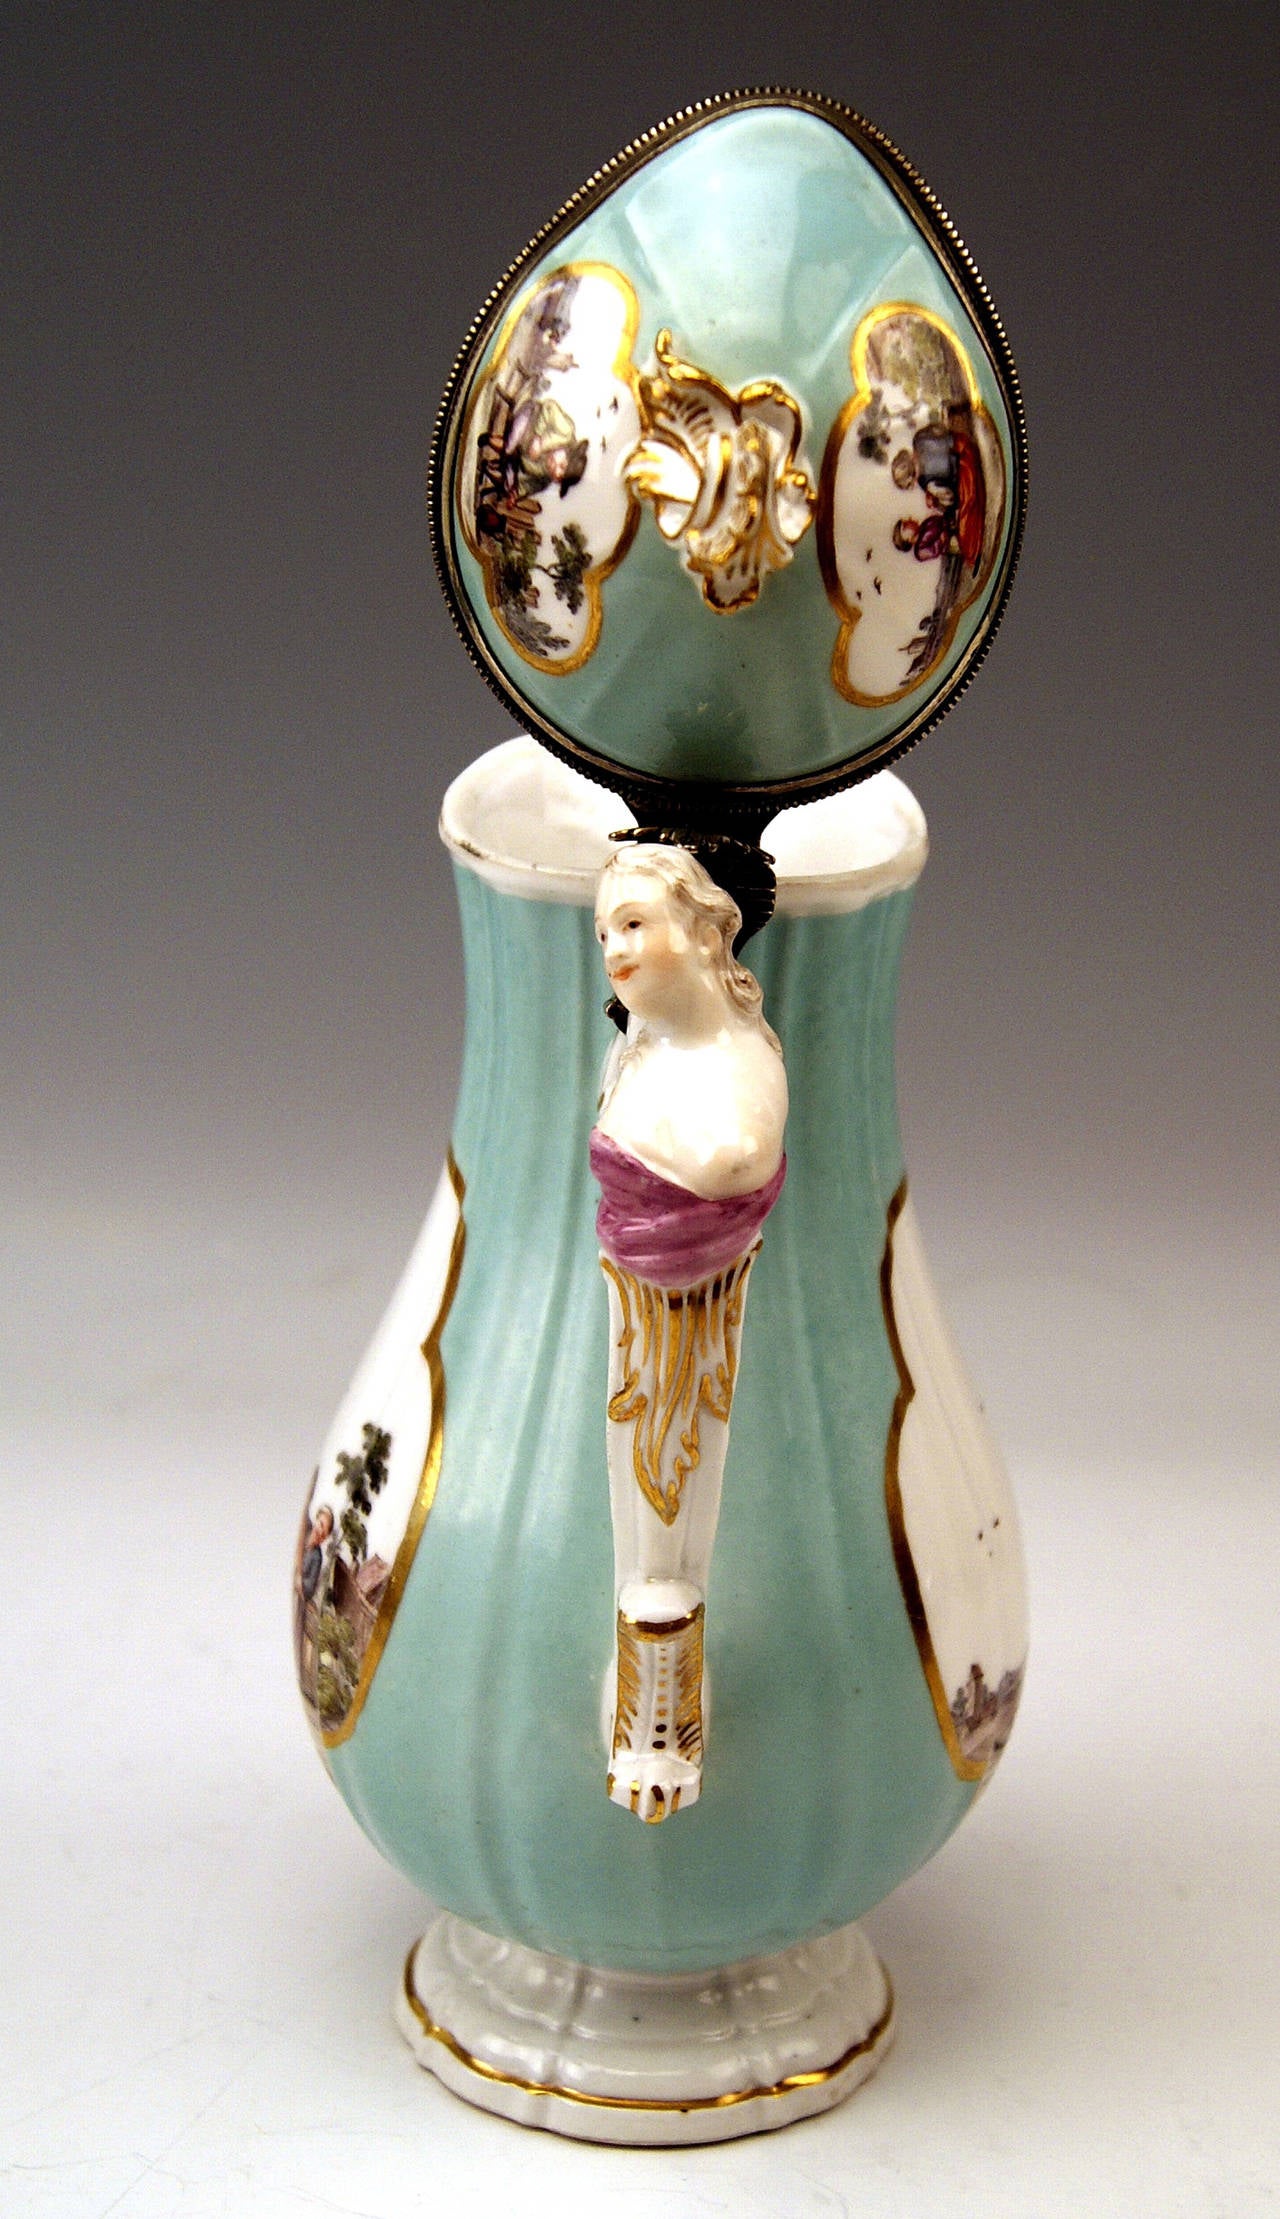 Painted Meissen Lidded Coffee Pot Rococo Period, Made circa 1750